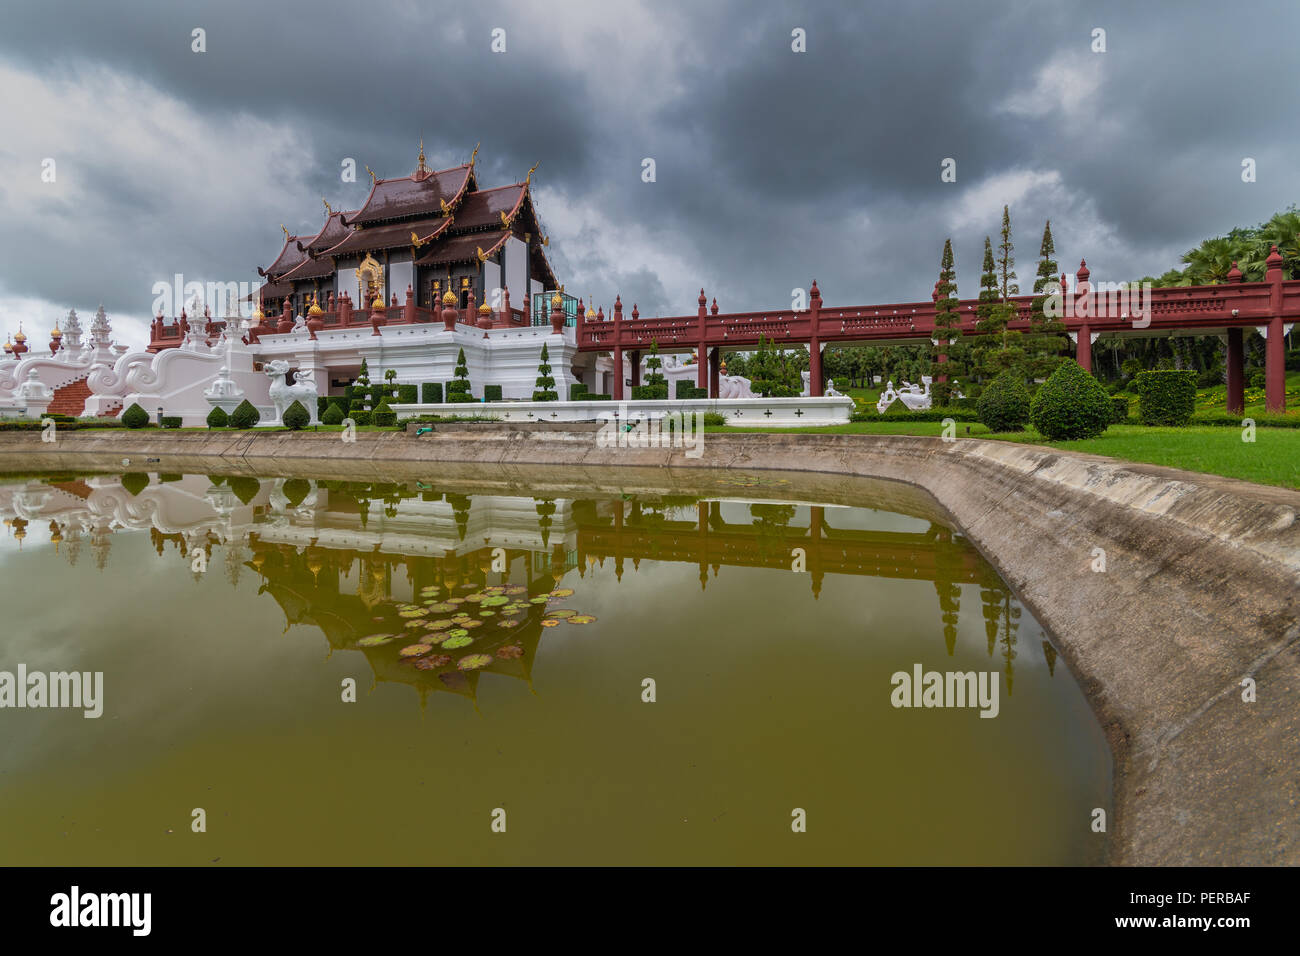 Chiangmai, Thailand - June, 27, 2018: Beautiful ancient style royal pavilion with reflection in swamp in Royal Park Rajapruek, the tourism travel dest Stock Photo